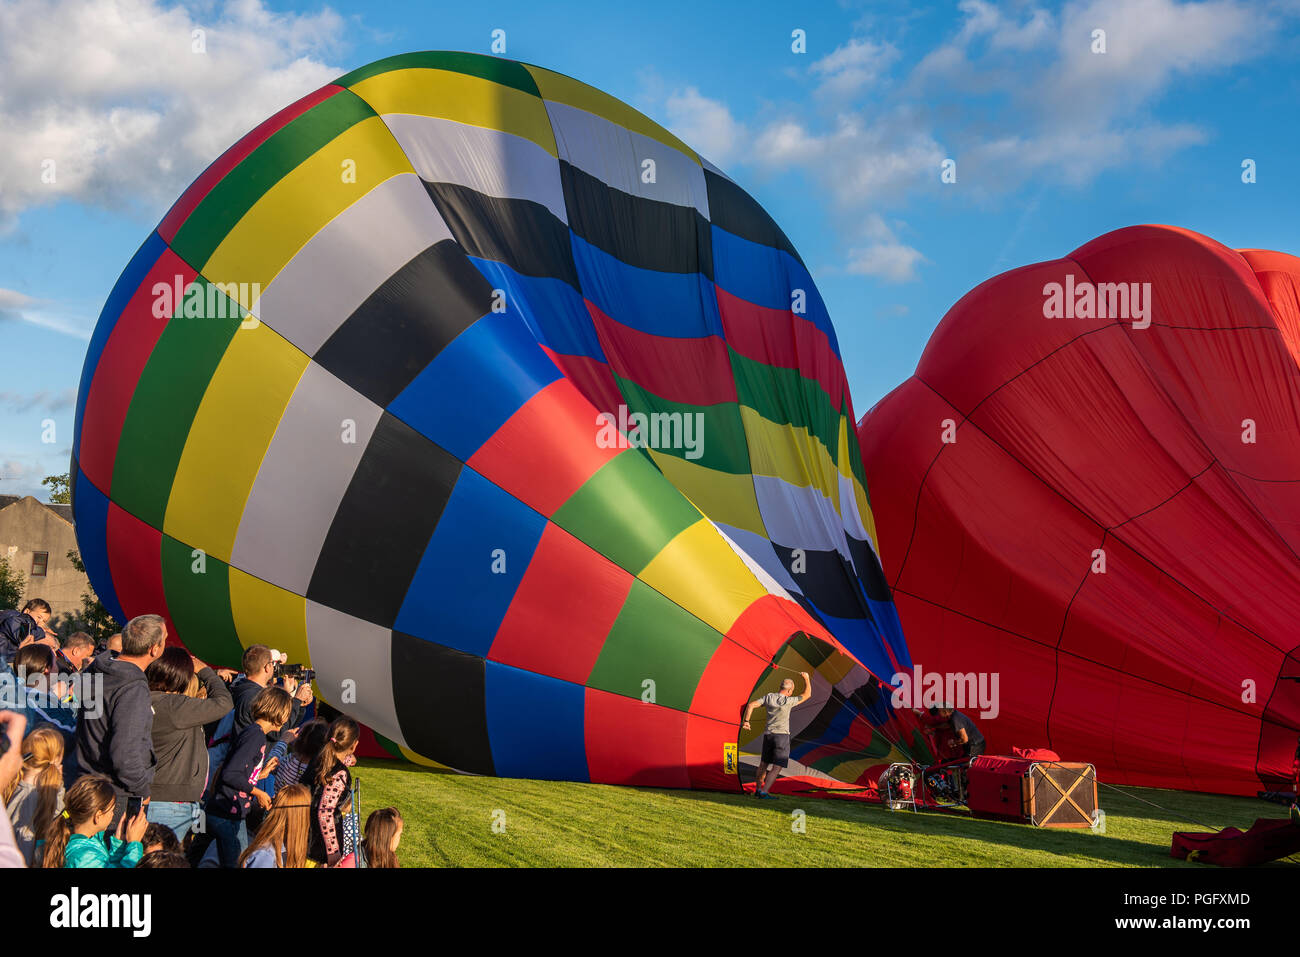 Strathaven, Scotland, 25th Aug, 2018. The international Balloon Festival is a display of hot air ballooning held in the John Hastie Park in Strathaven, Scotland. Credit George Robertson/Alamy Live News Stock Photo